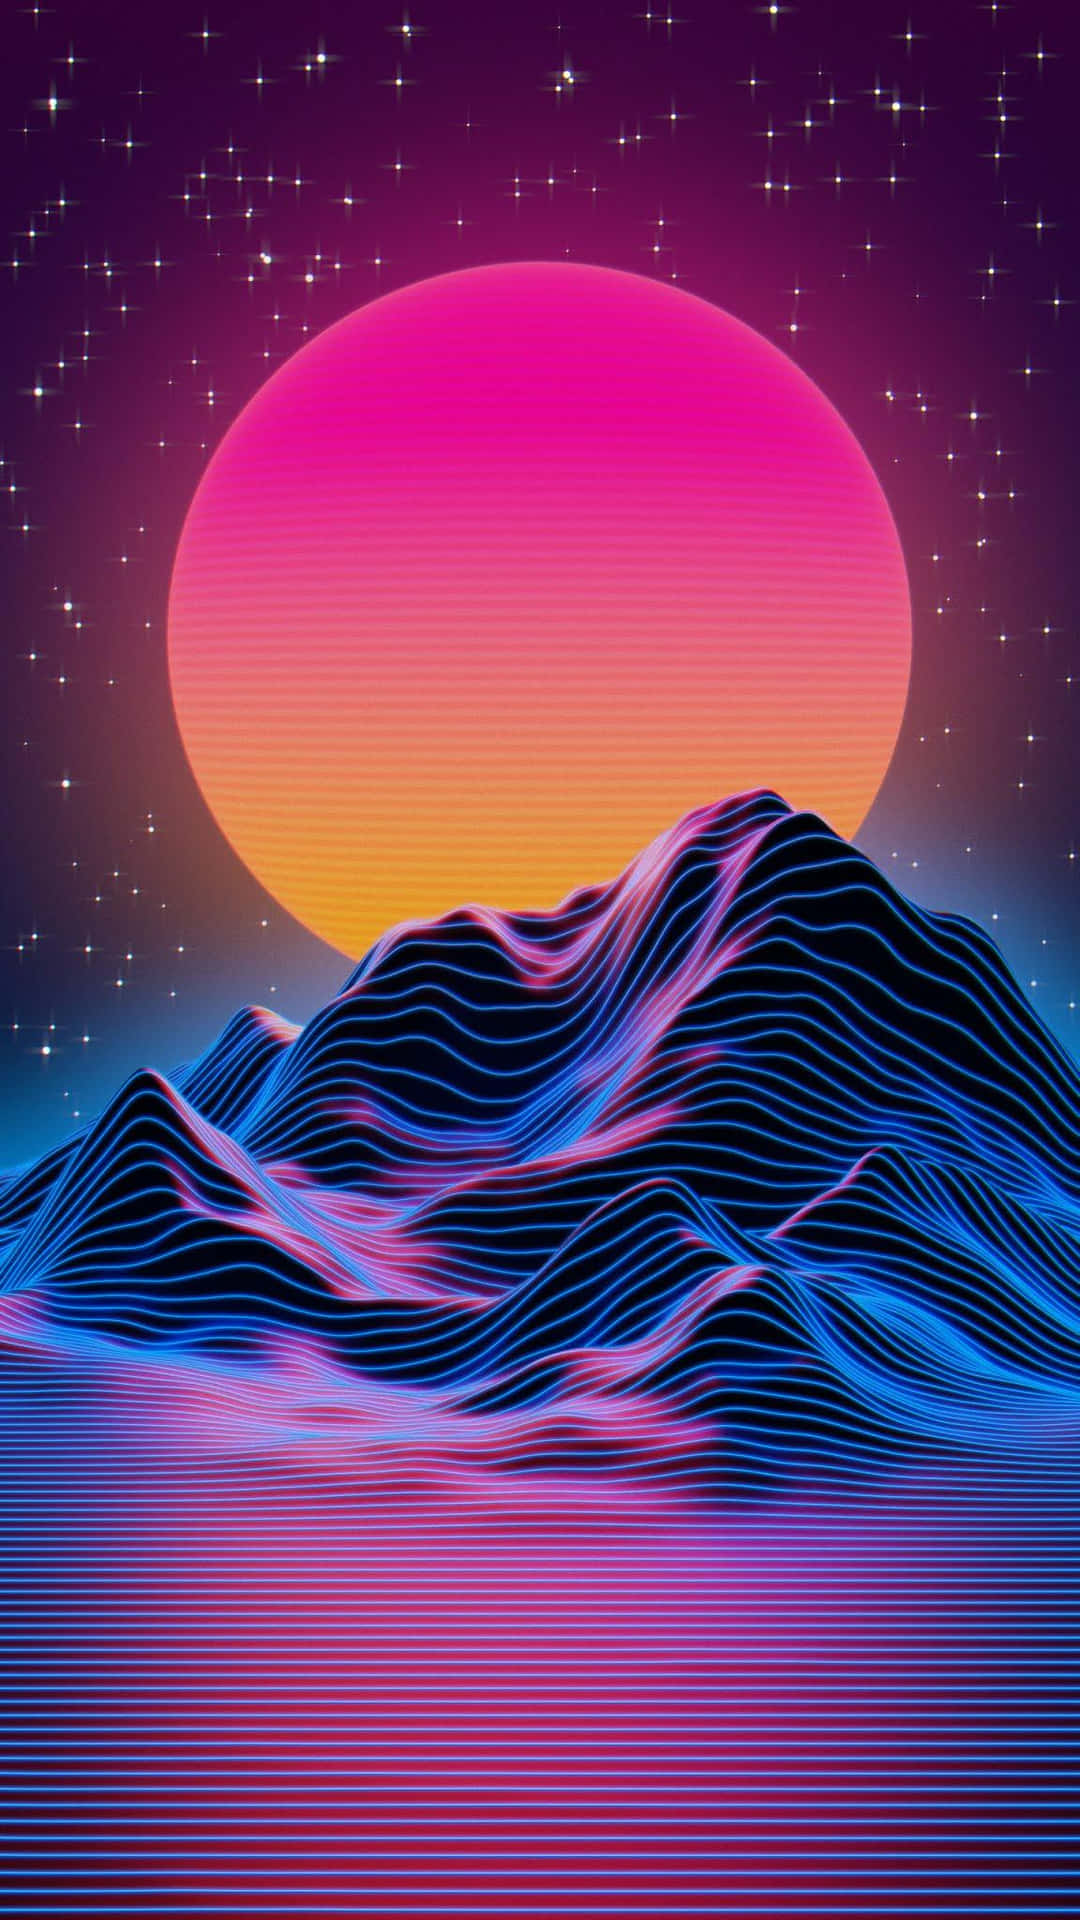 Synthwave Sunset Mountain Aesthetic Wallpaper